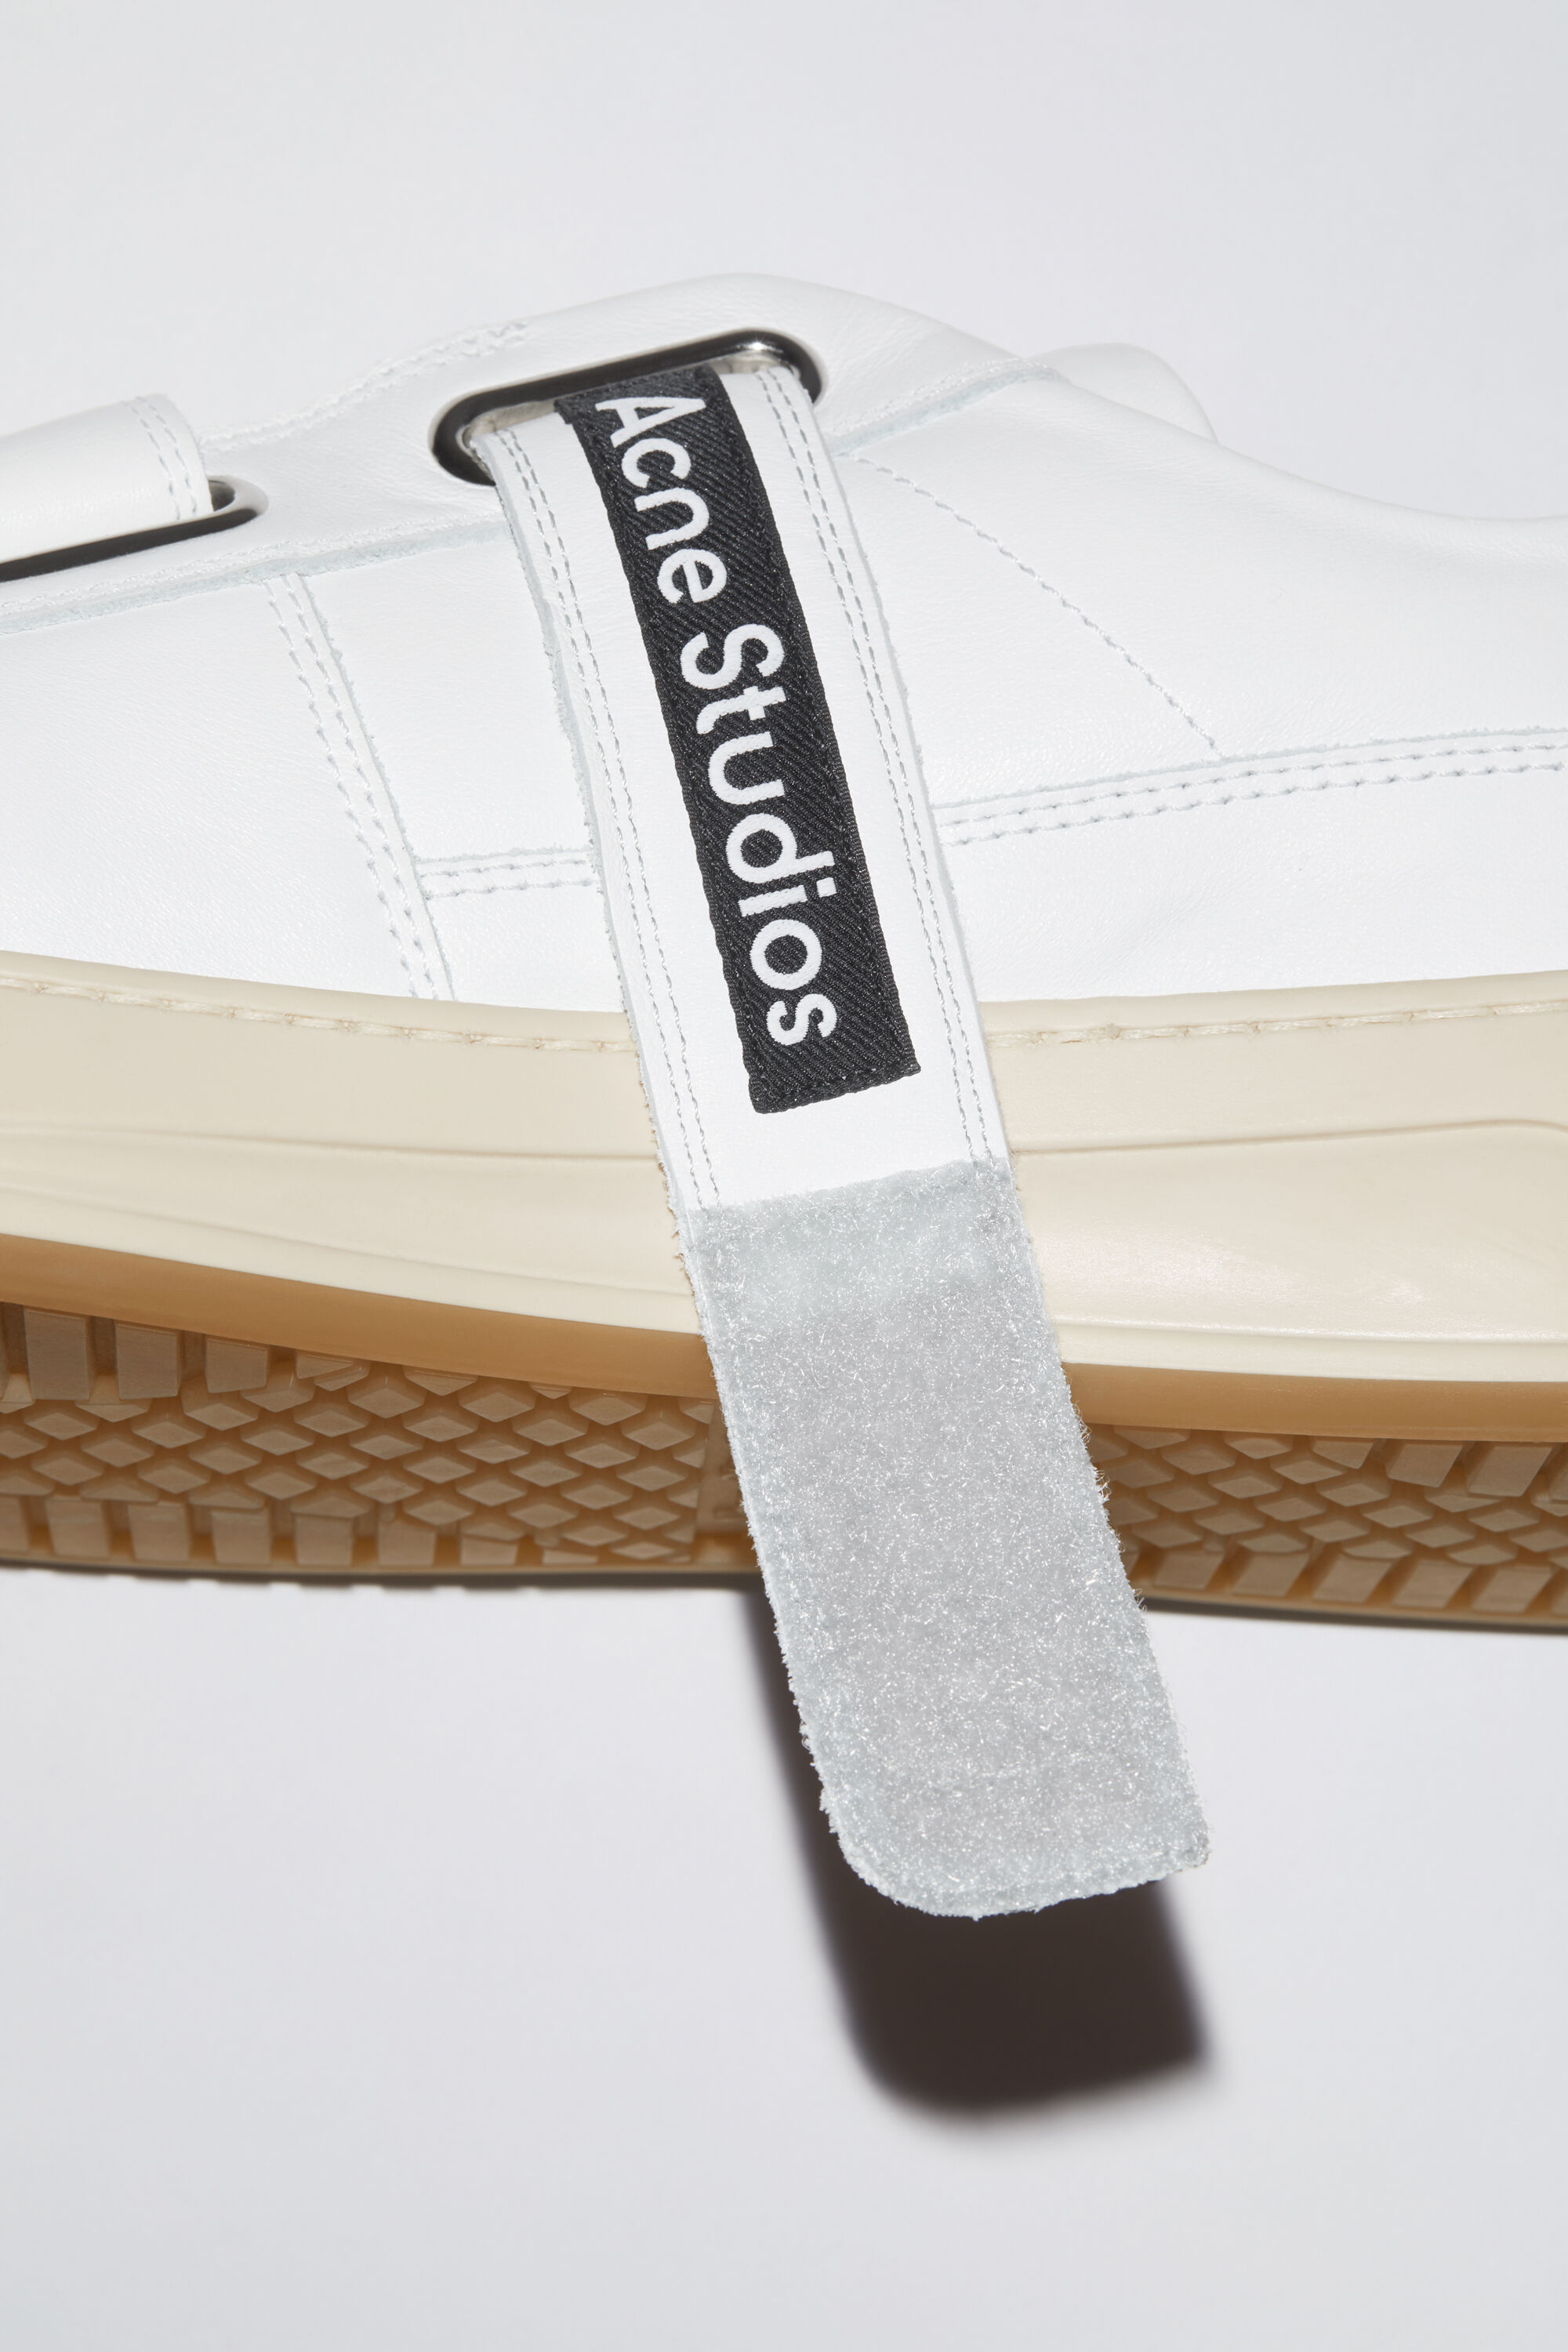 Hypebae | Sneakers Doucals wash In Pelle Scamosciata from Doucals | Acne  Studios Releases Boltzer Football Sneakers